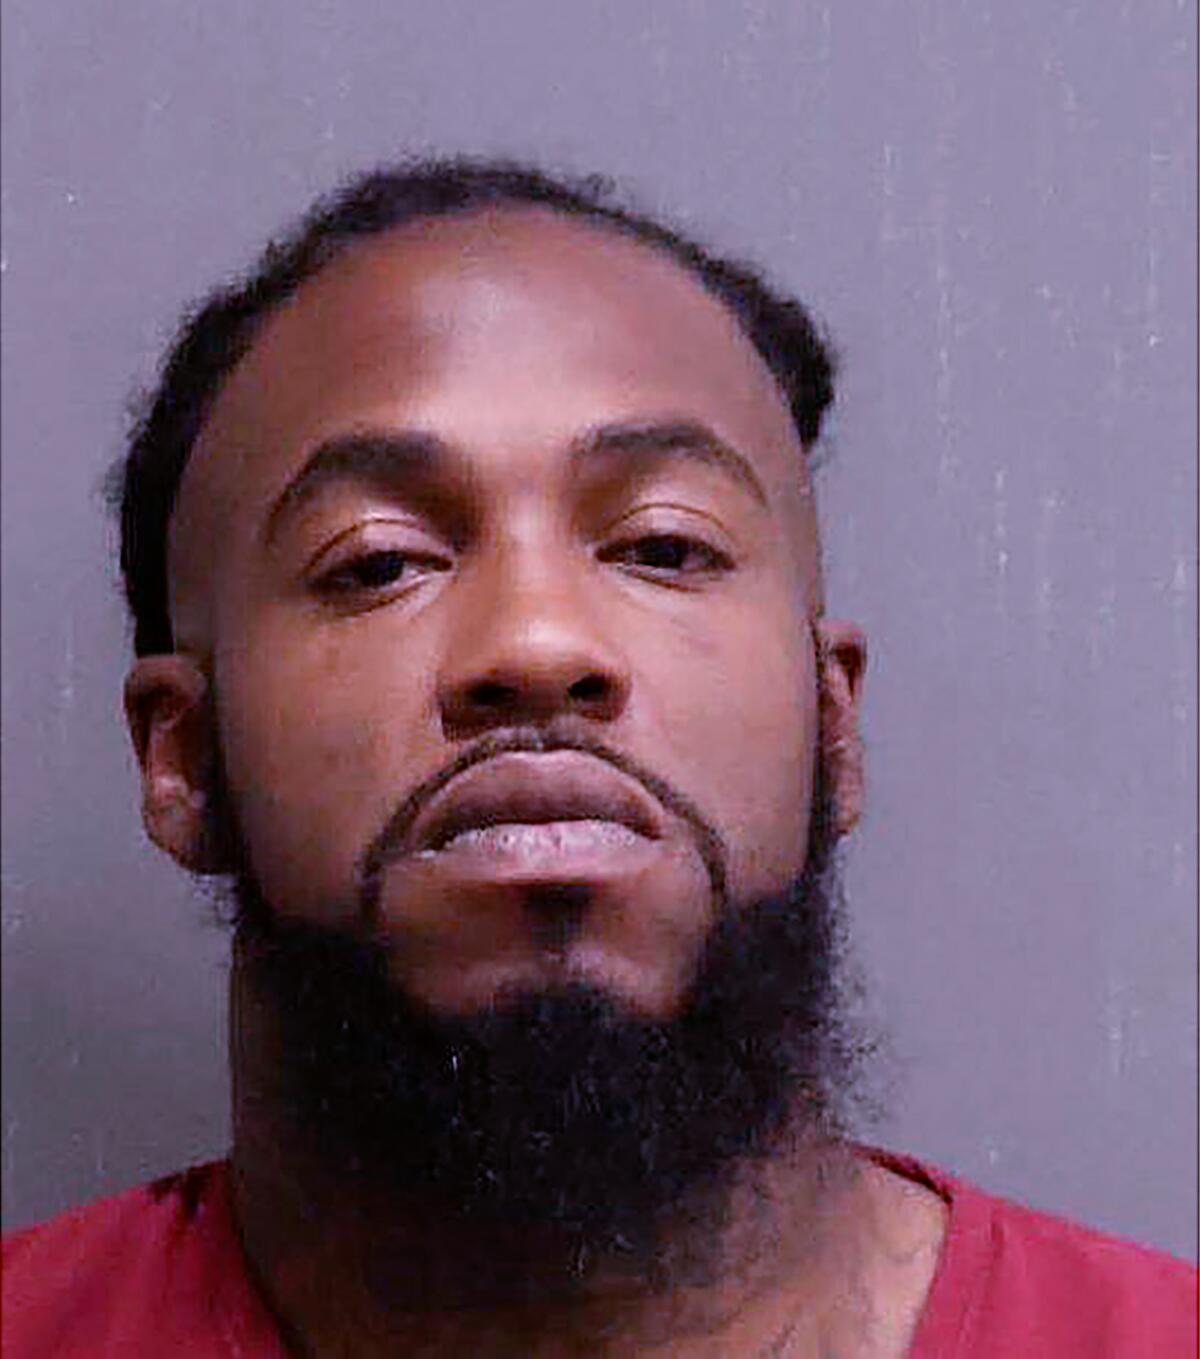 A booking photo of a bearded person.